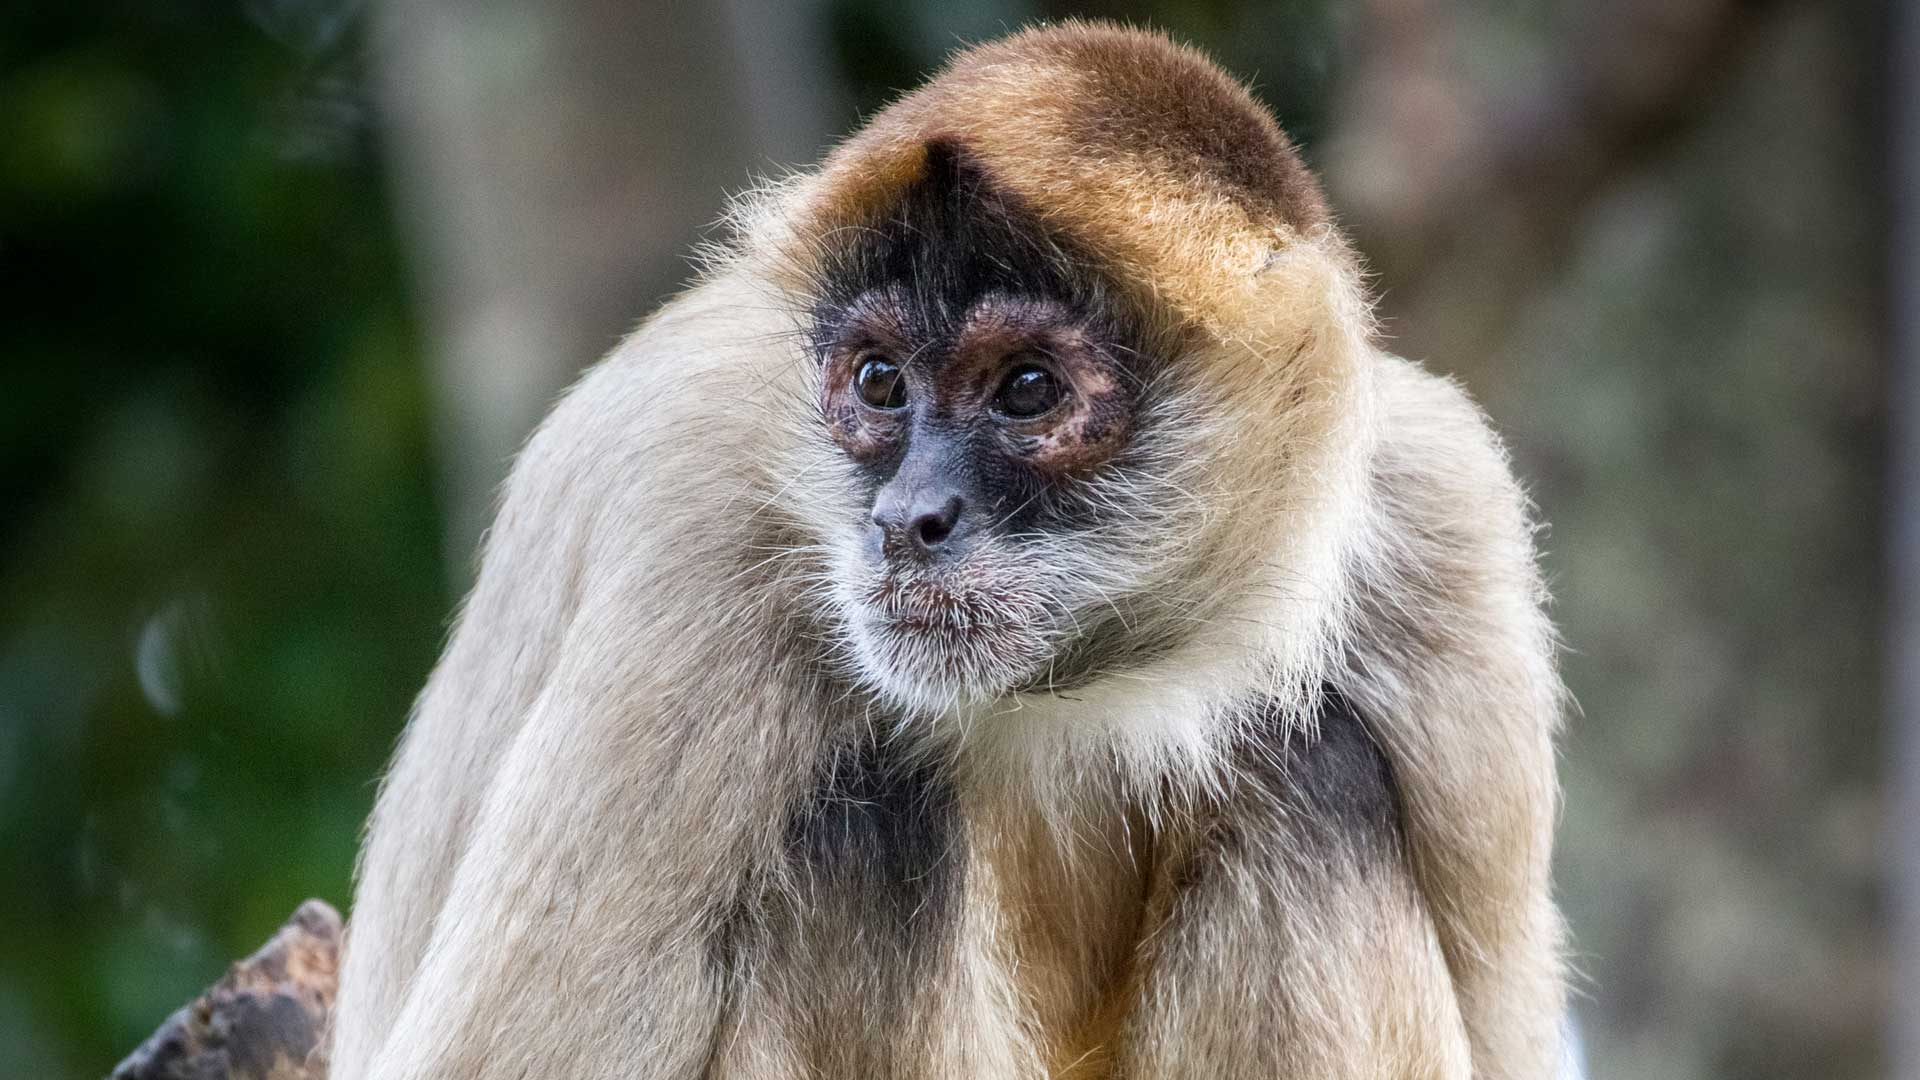 spidermonkey wallpapers wallpaper cave on spider monkey wallpapers